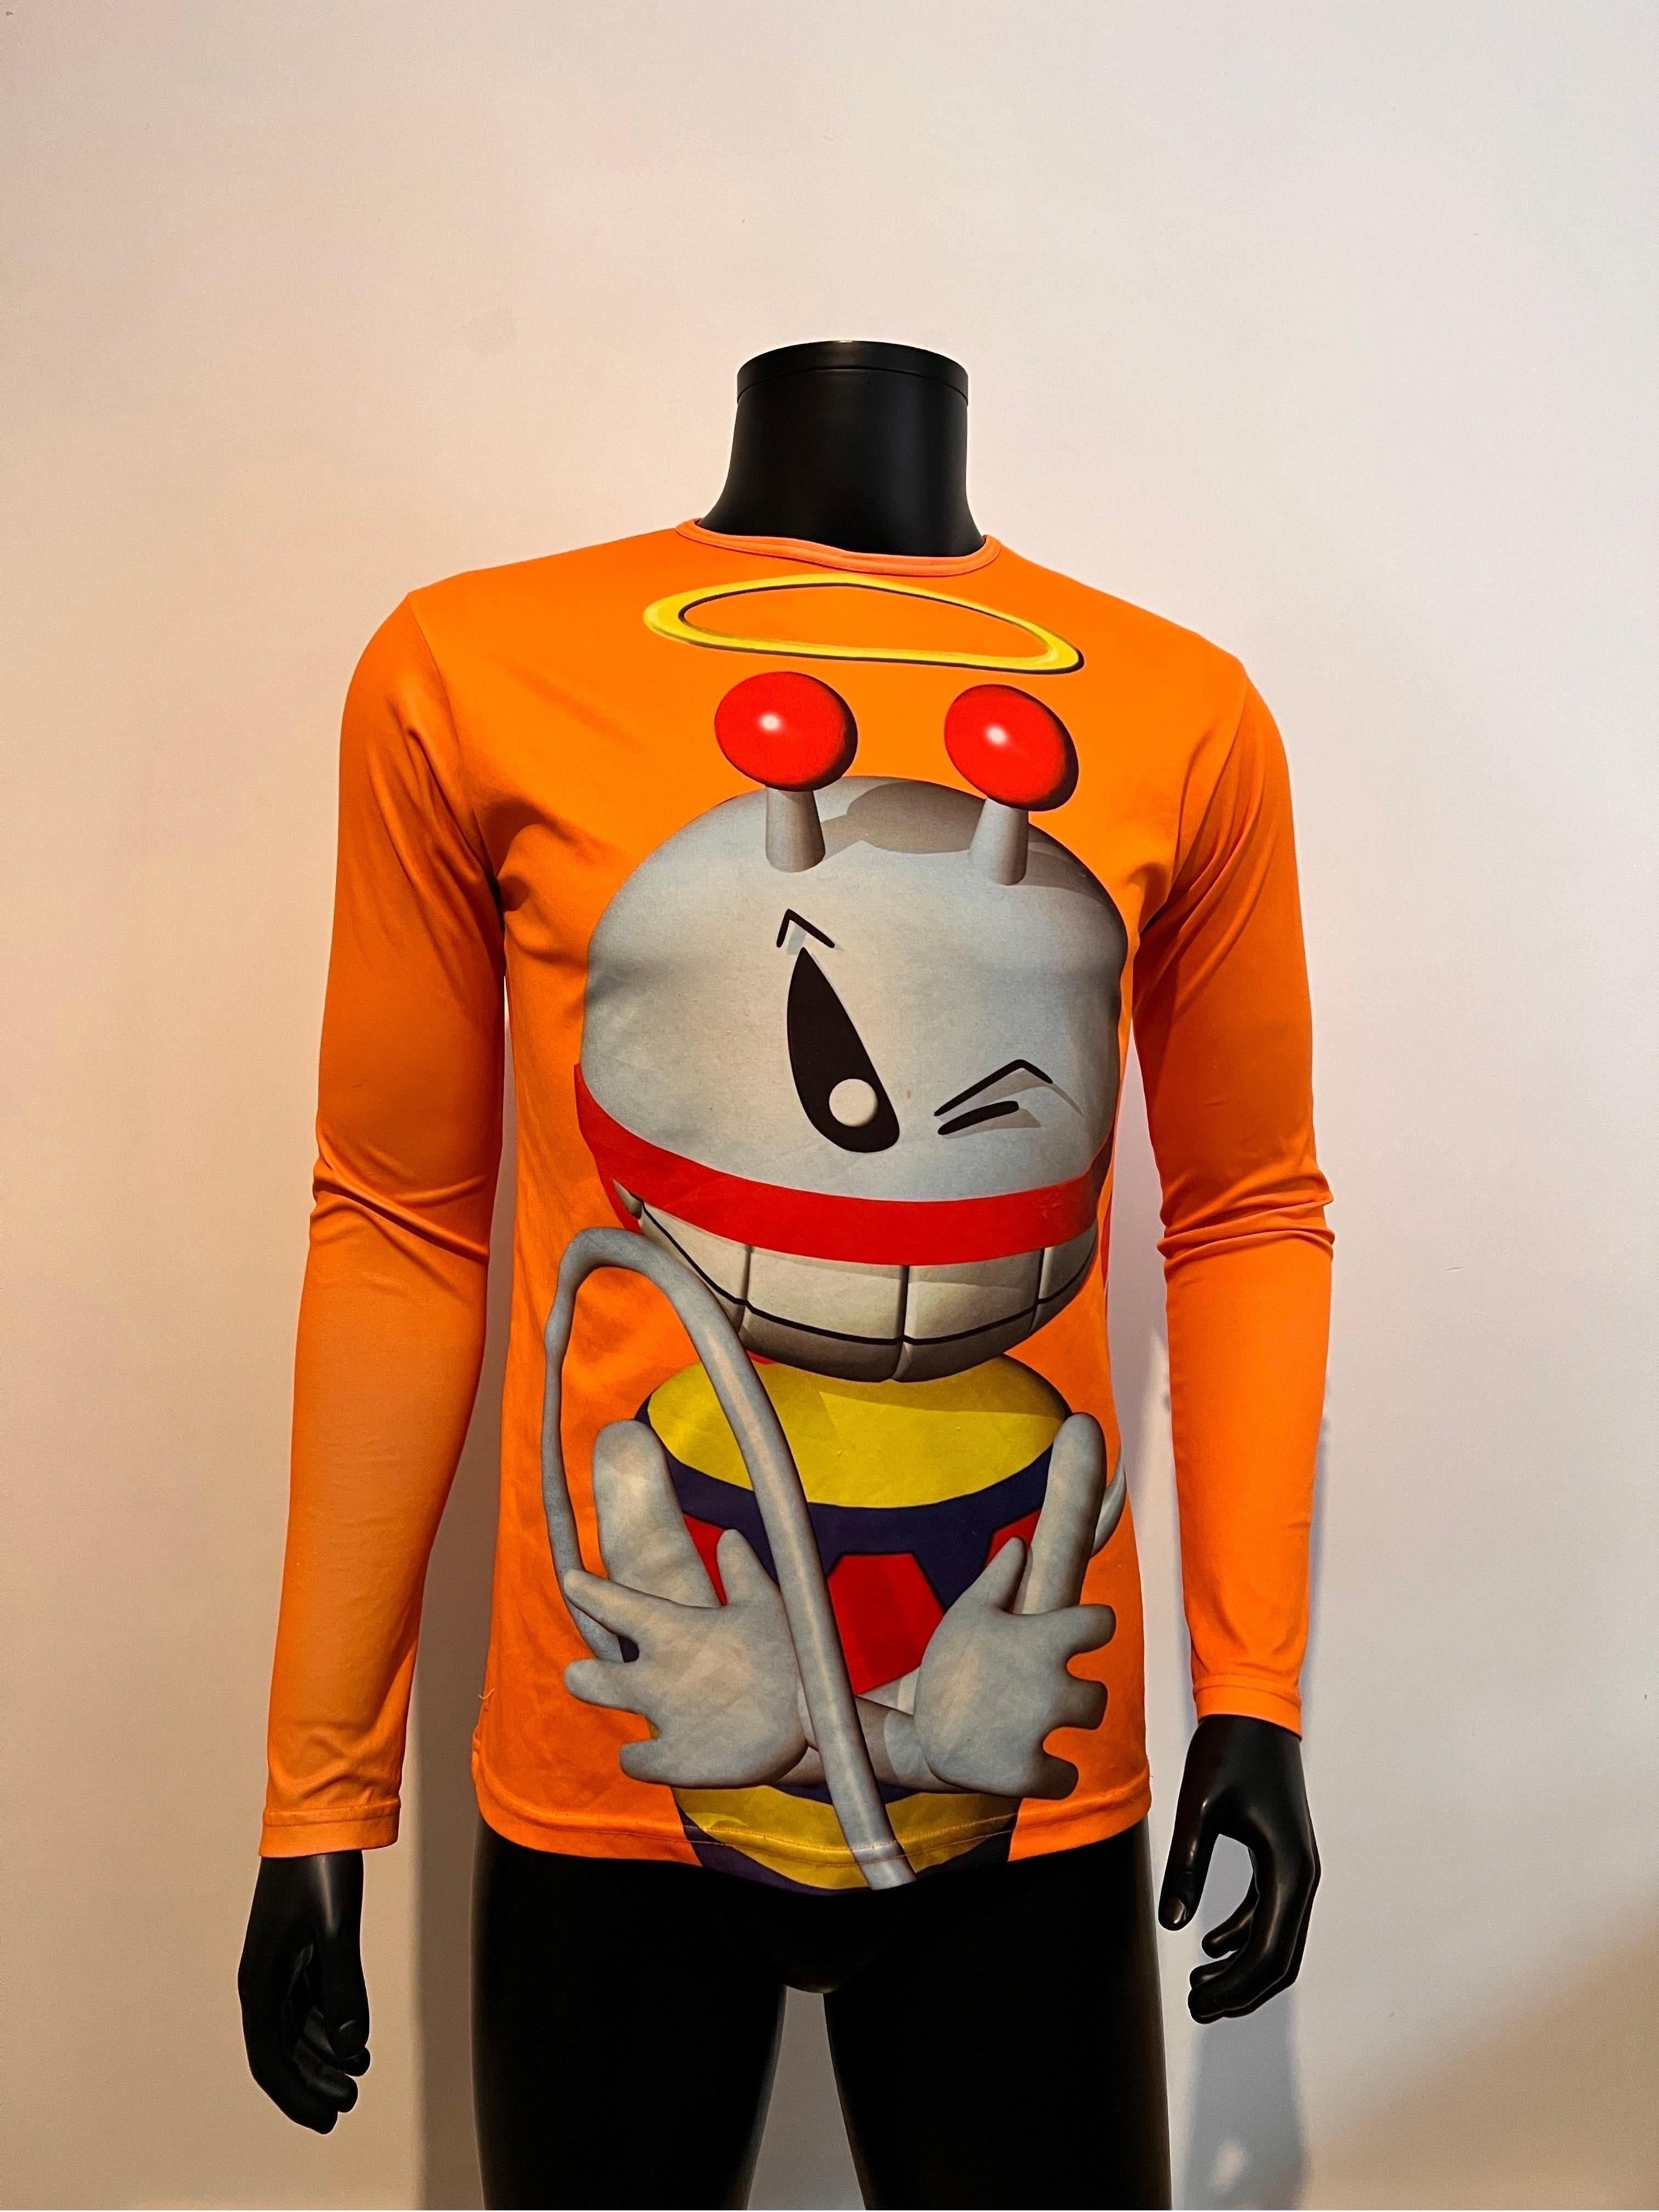 Iconic W< (Wild & Lethal Trash) by Walter Van Beirendonck long sleeve tee shirt in a bright orange featuring the 3d black rubber tag and a bold 3d render of the brands mascot Puk Puk! The set also includes an over layer short sleeved tee shirt